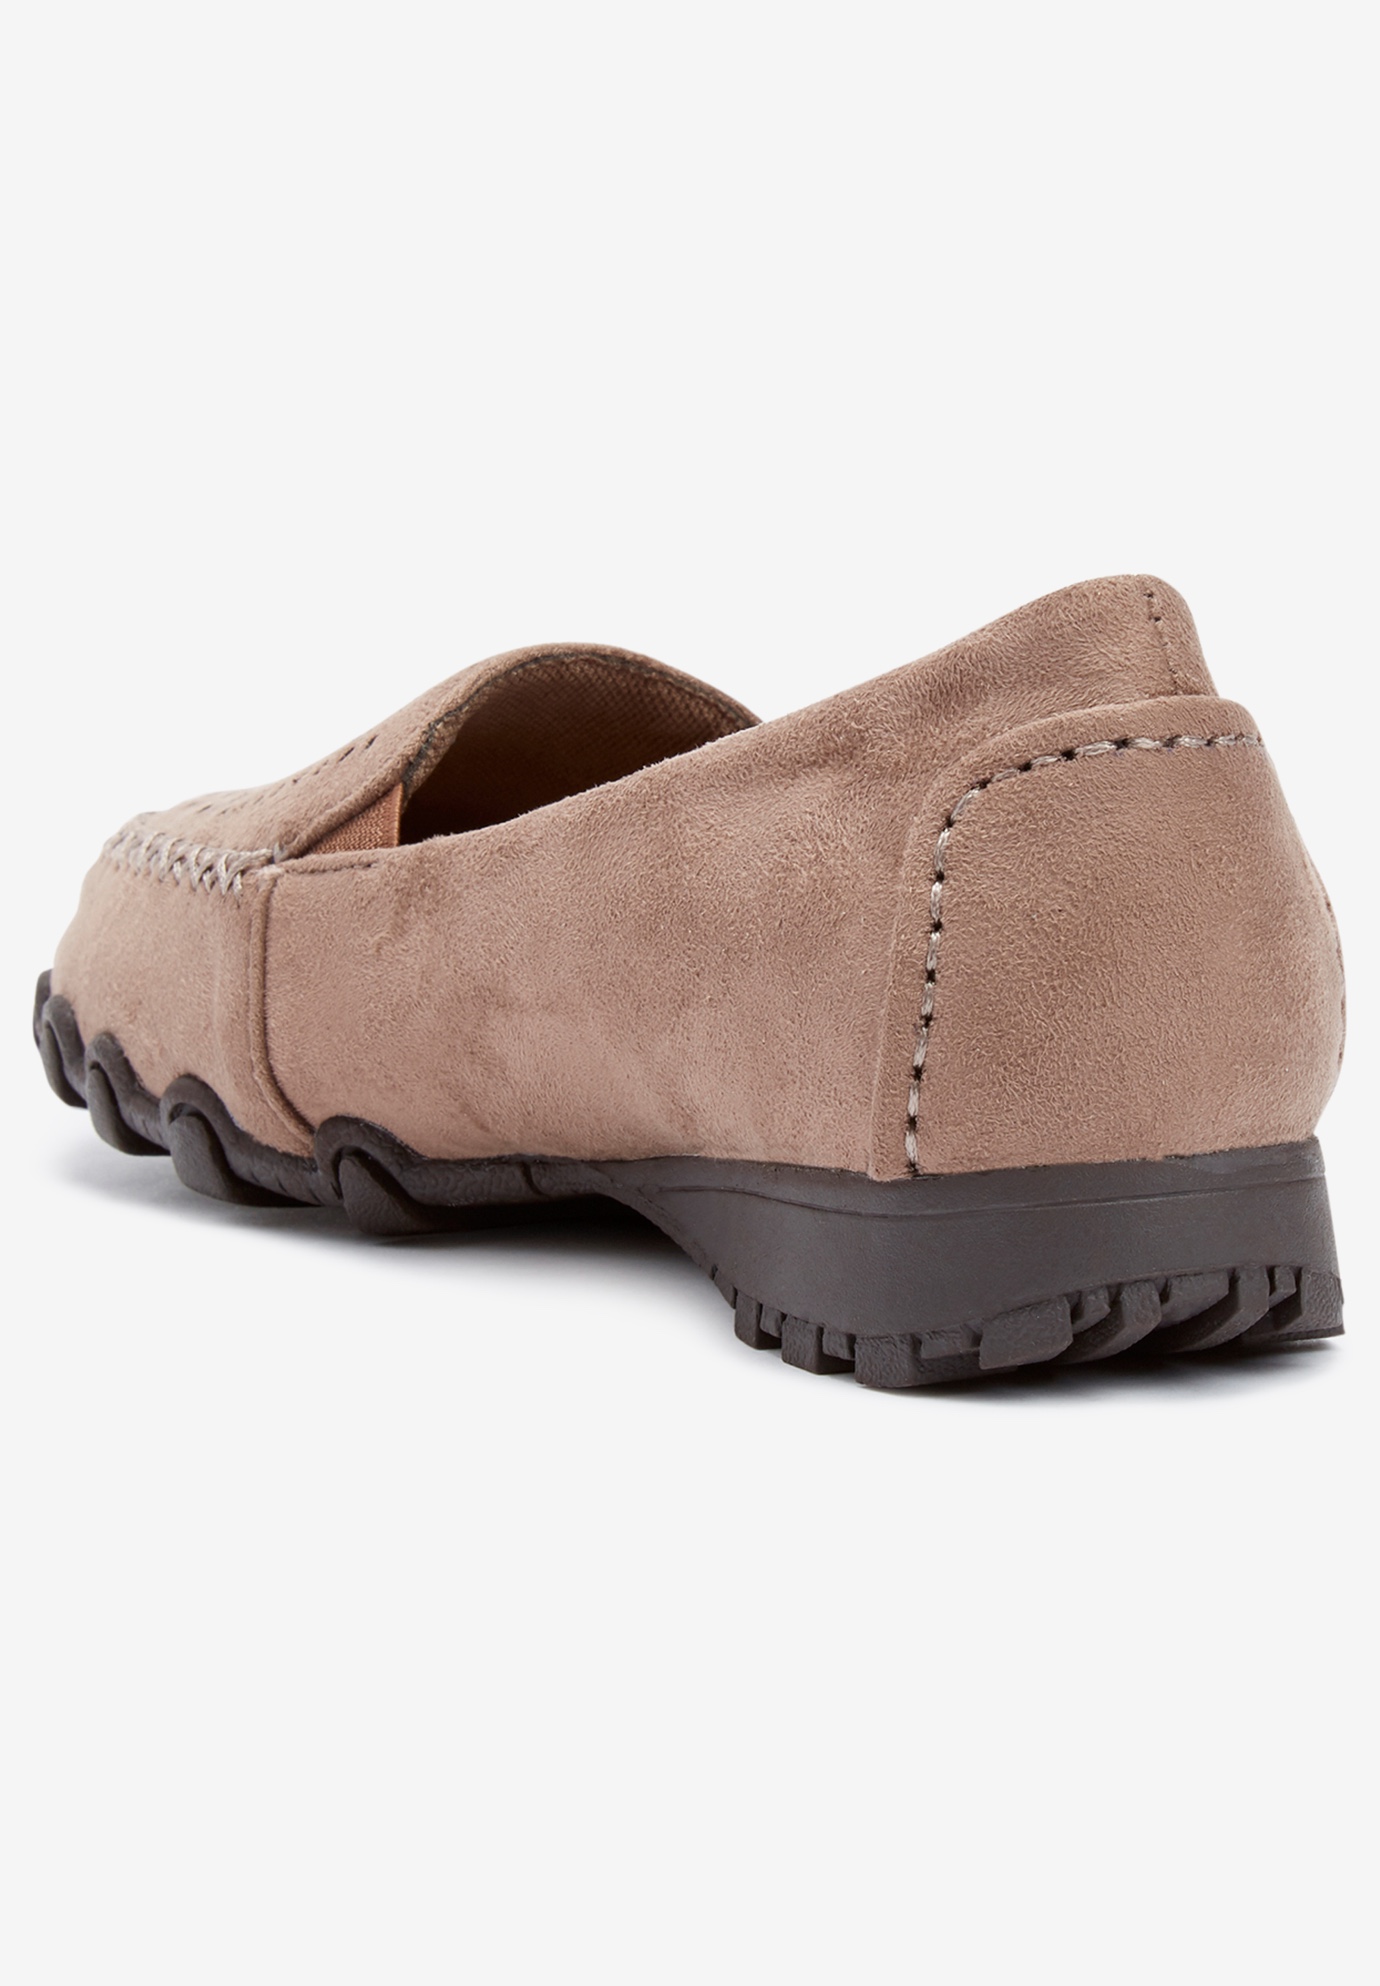 Comfortview Women's Wide Width The Jancis Slip On Flat Shoes - image 3 of 7